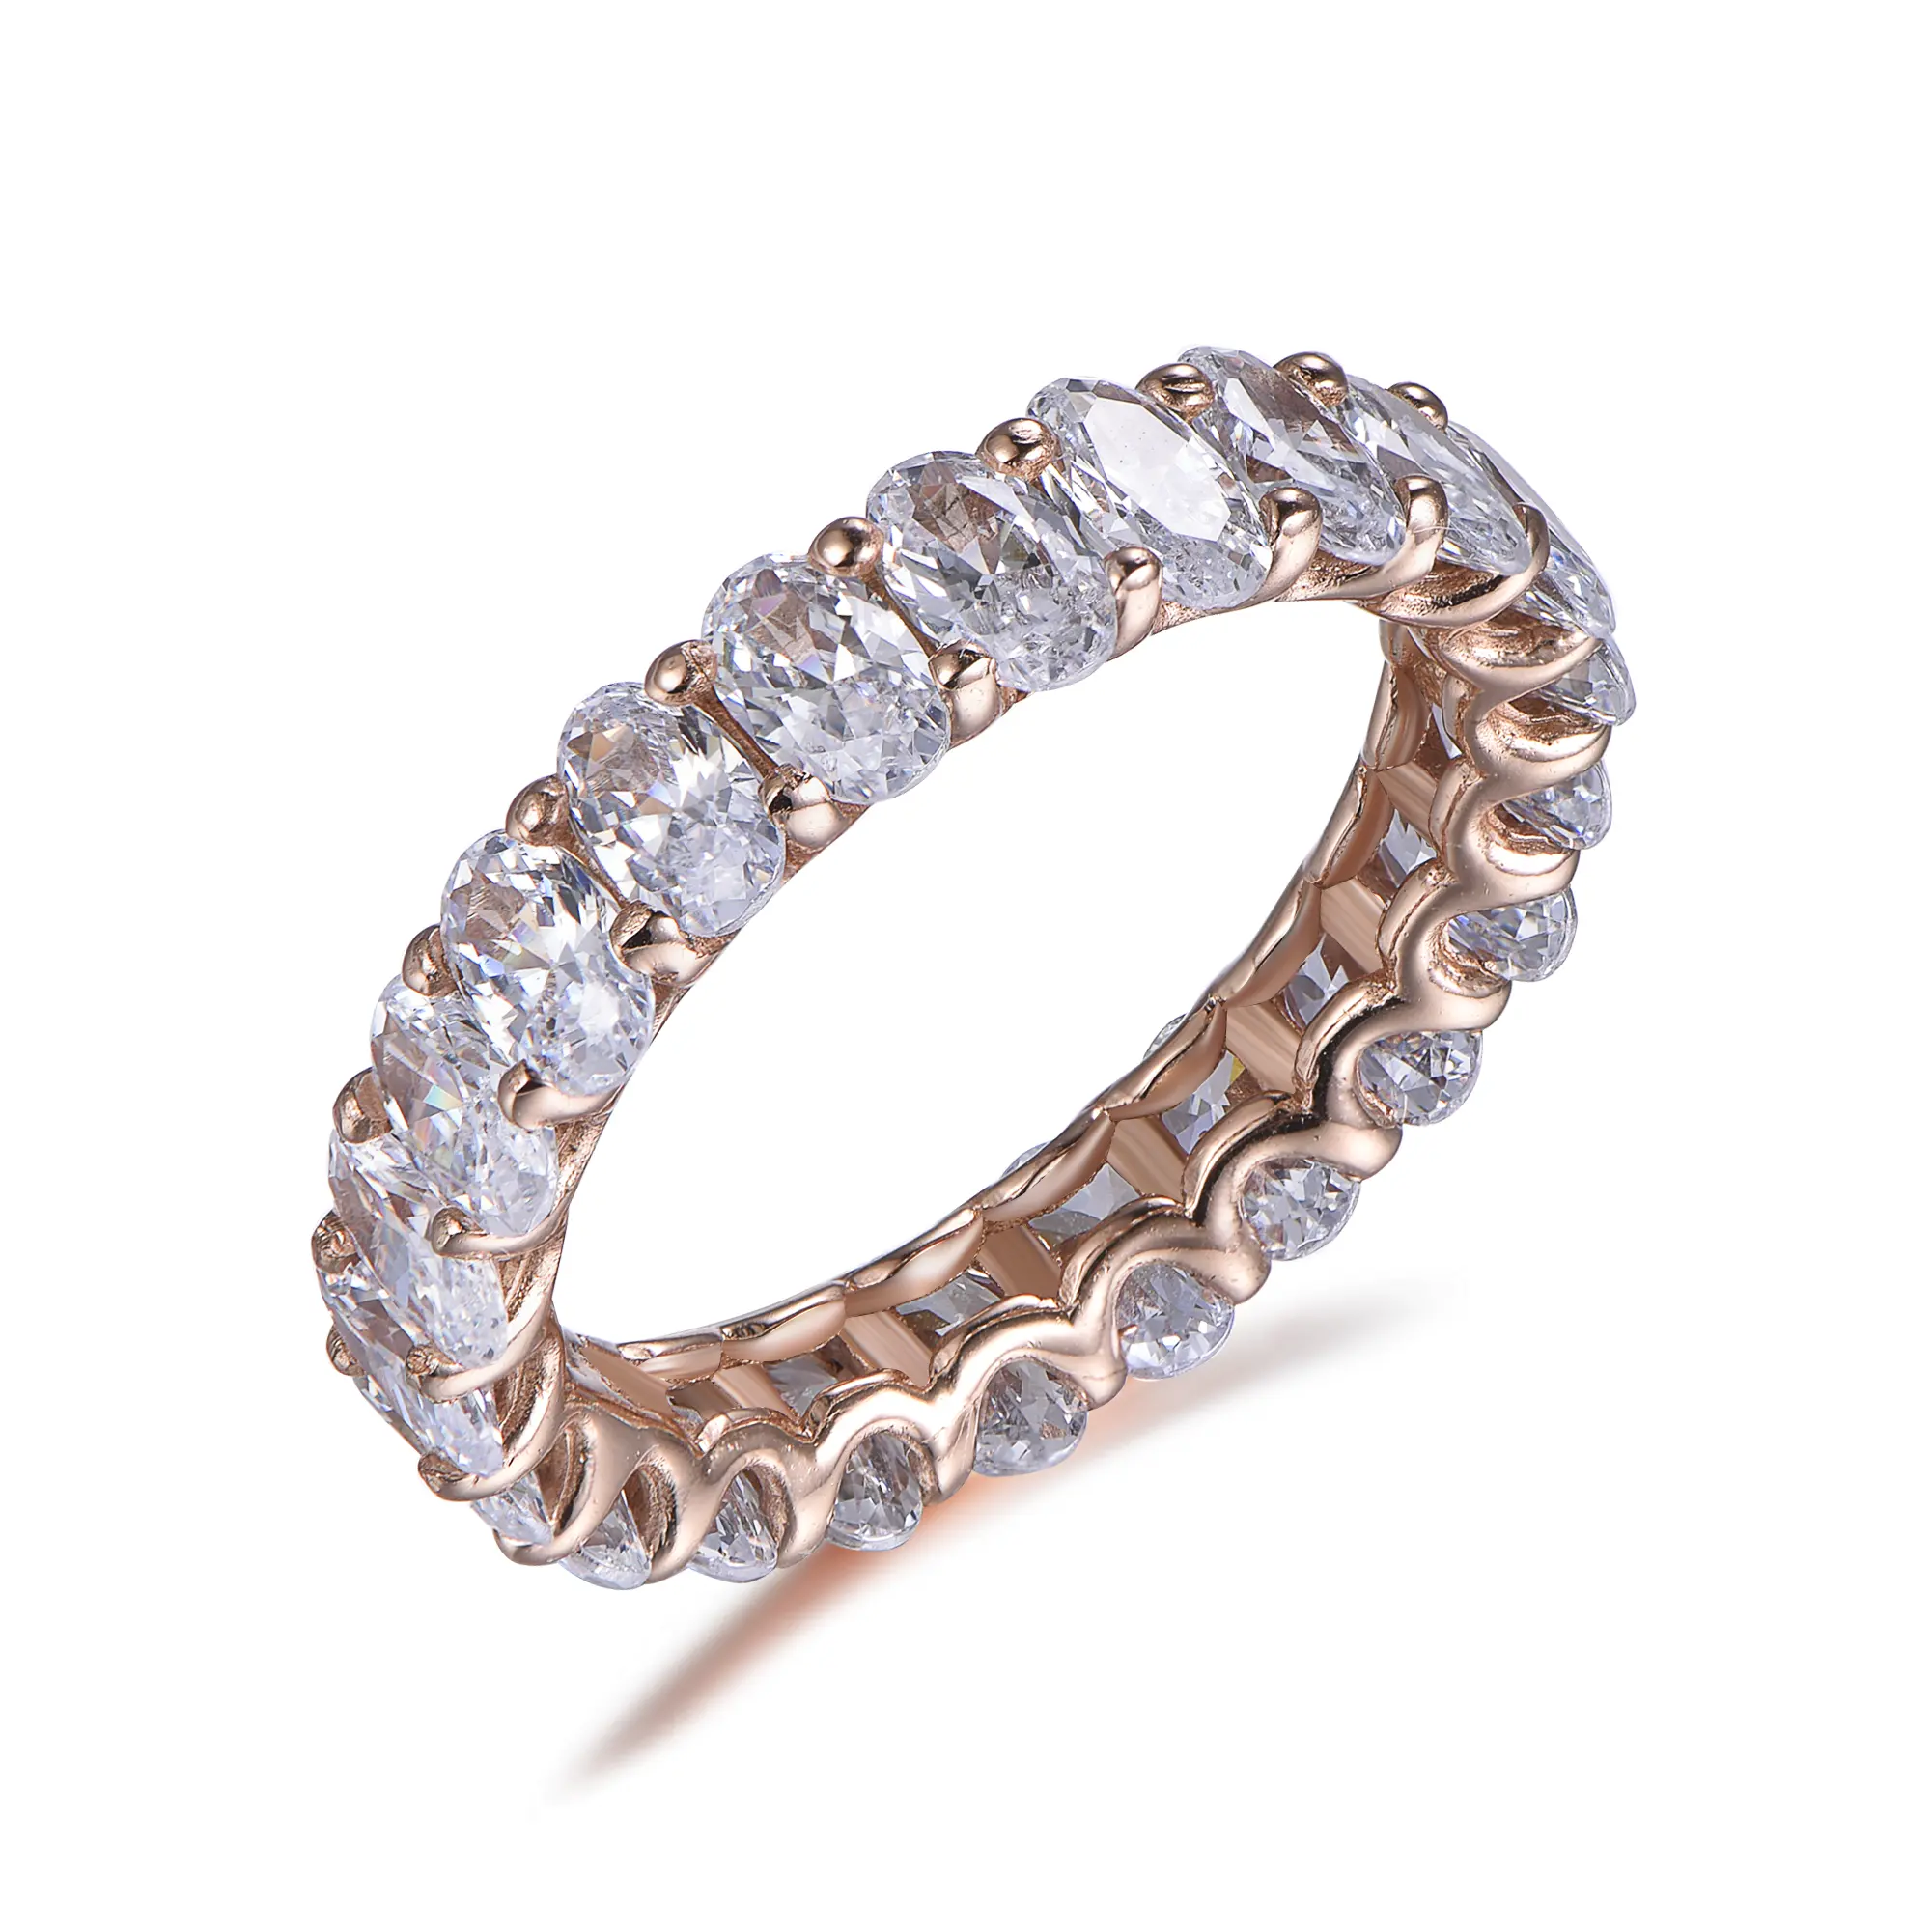 Luxury Women Finger Ring White Gold Plated Round Cut 5A CZ Diamond Eternity Band Ring